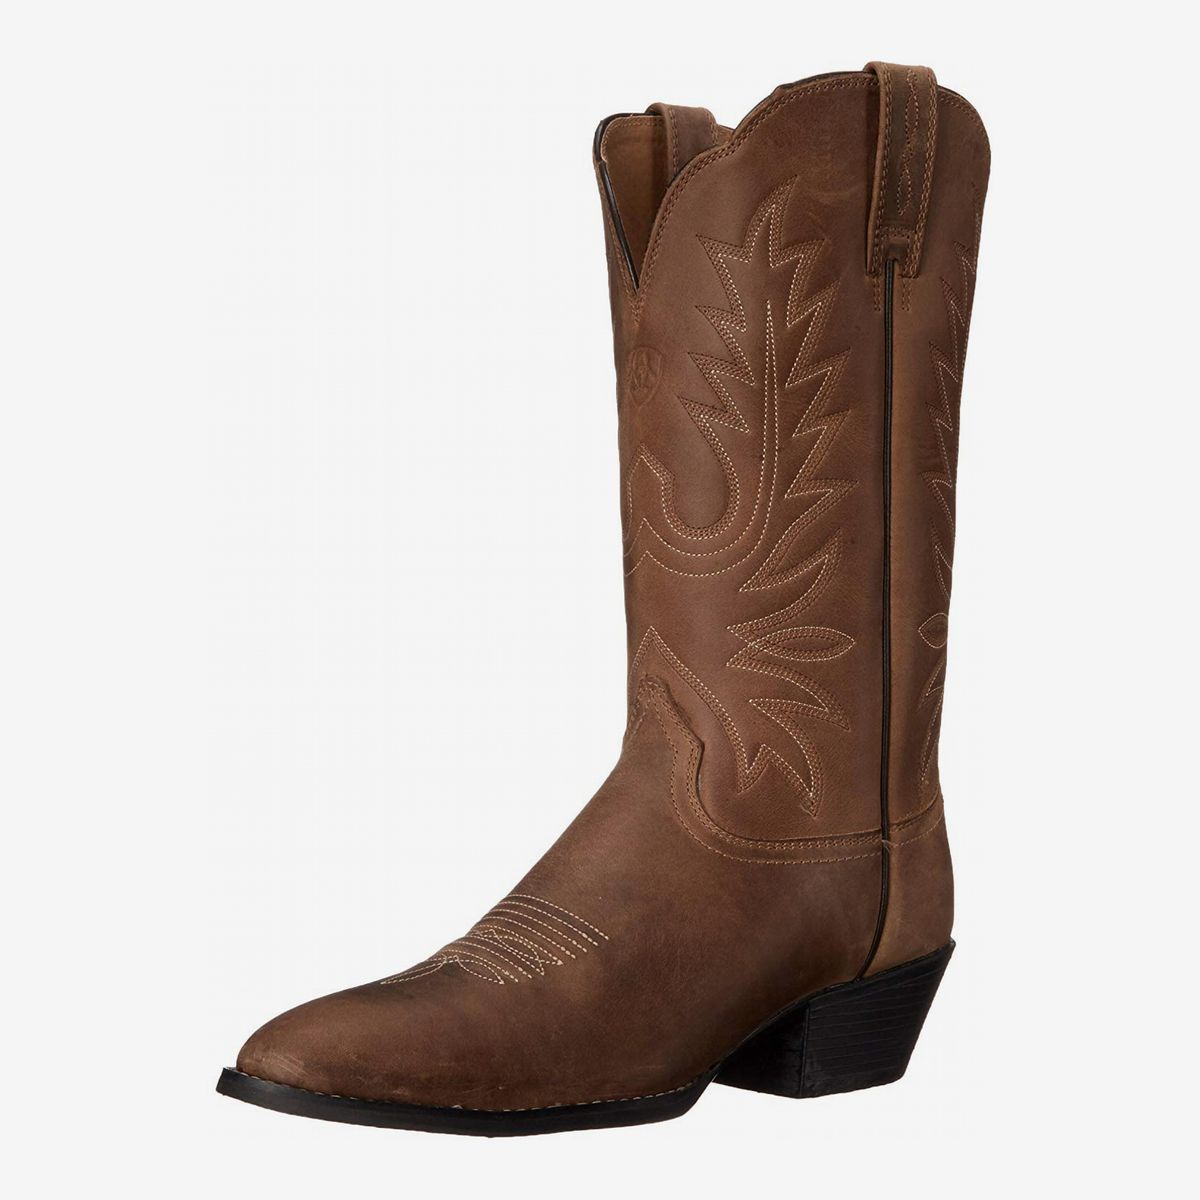 cowgirl boots for riding horses